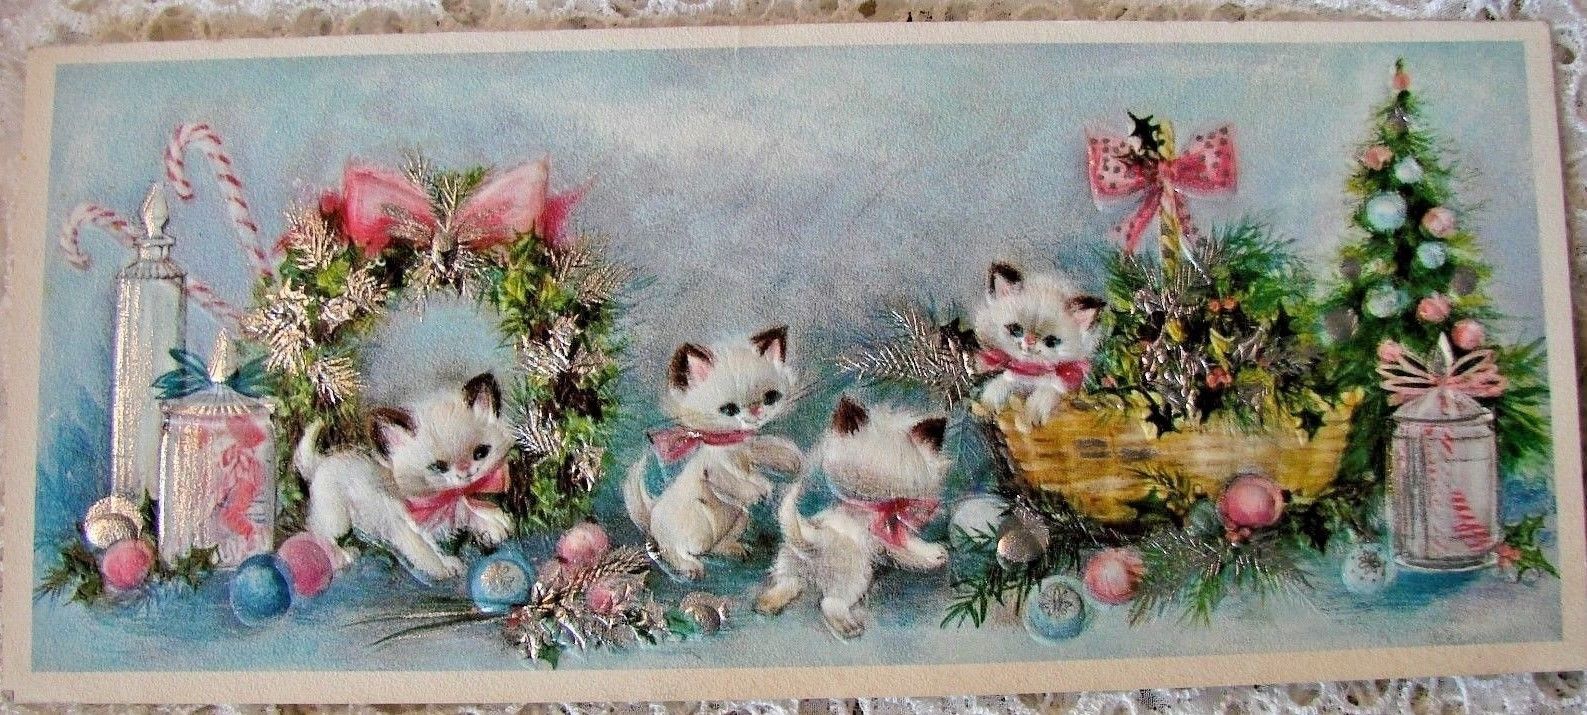 Vintage Christmas Greeting Card Mid Century Modern Pink White Kitty Cats Candy Antique Price Guide Details Page